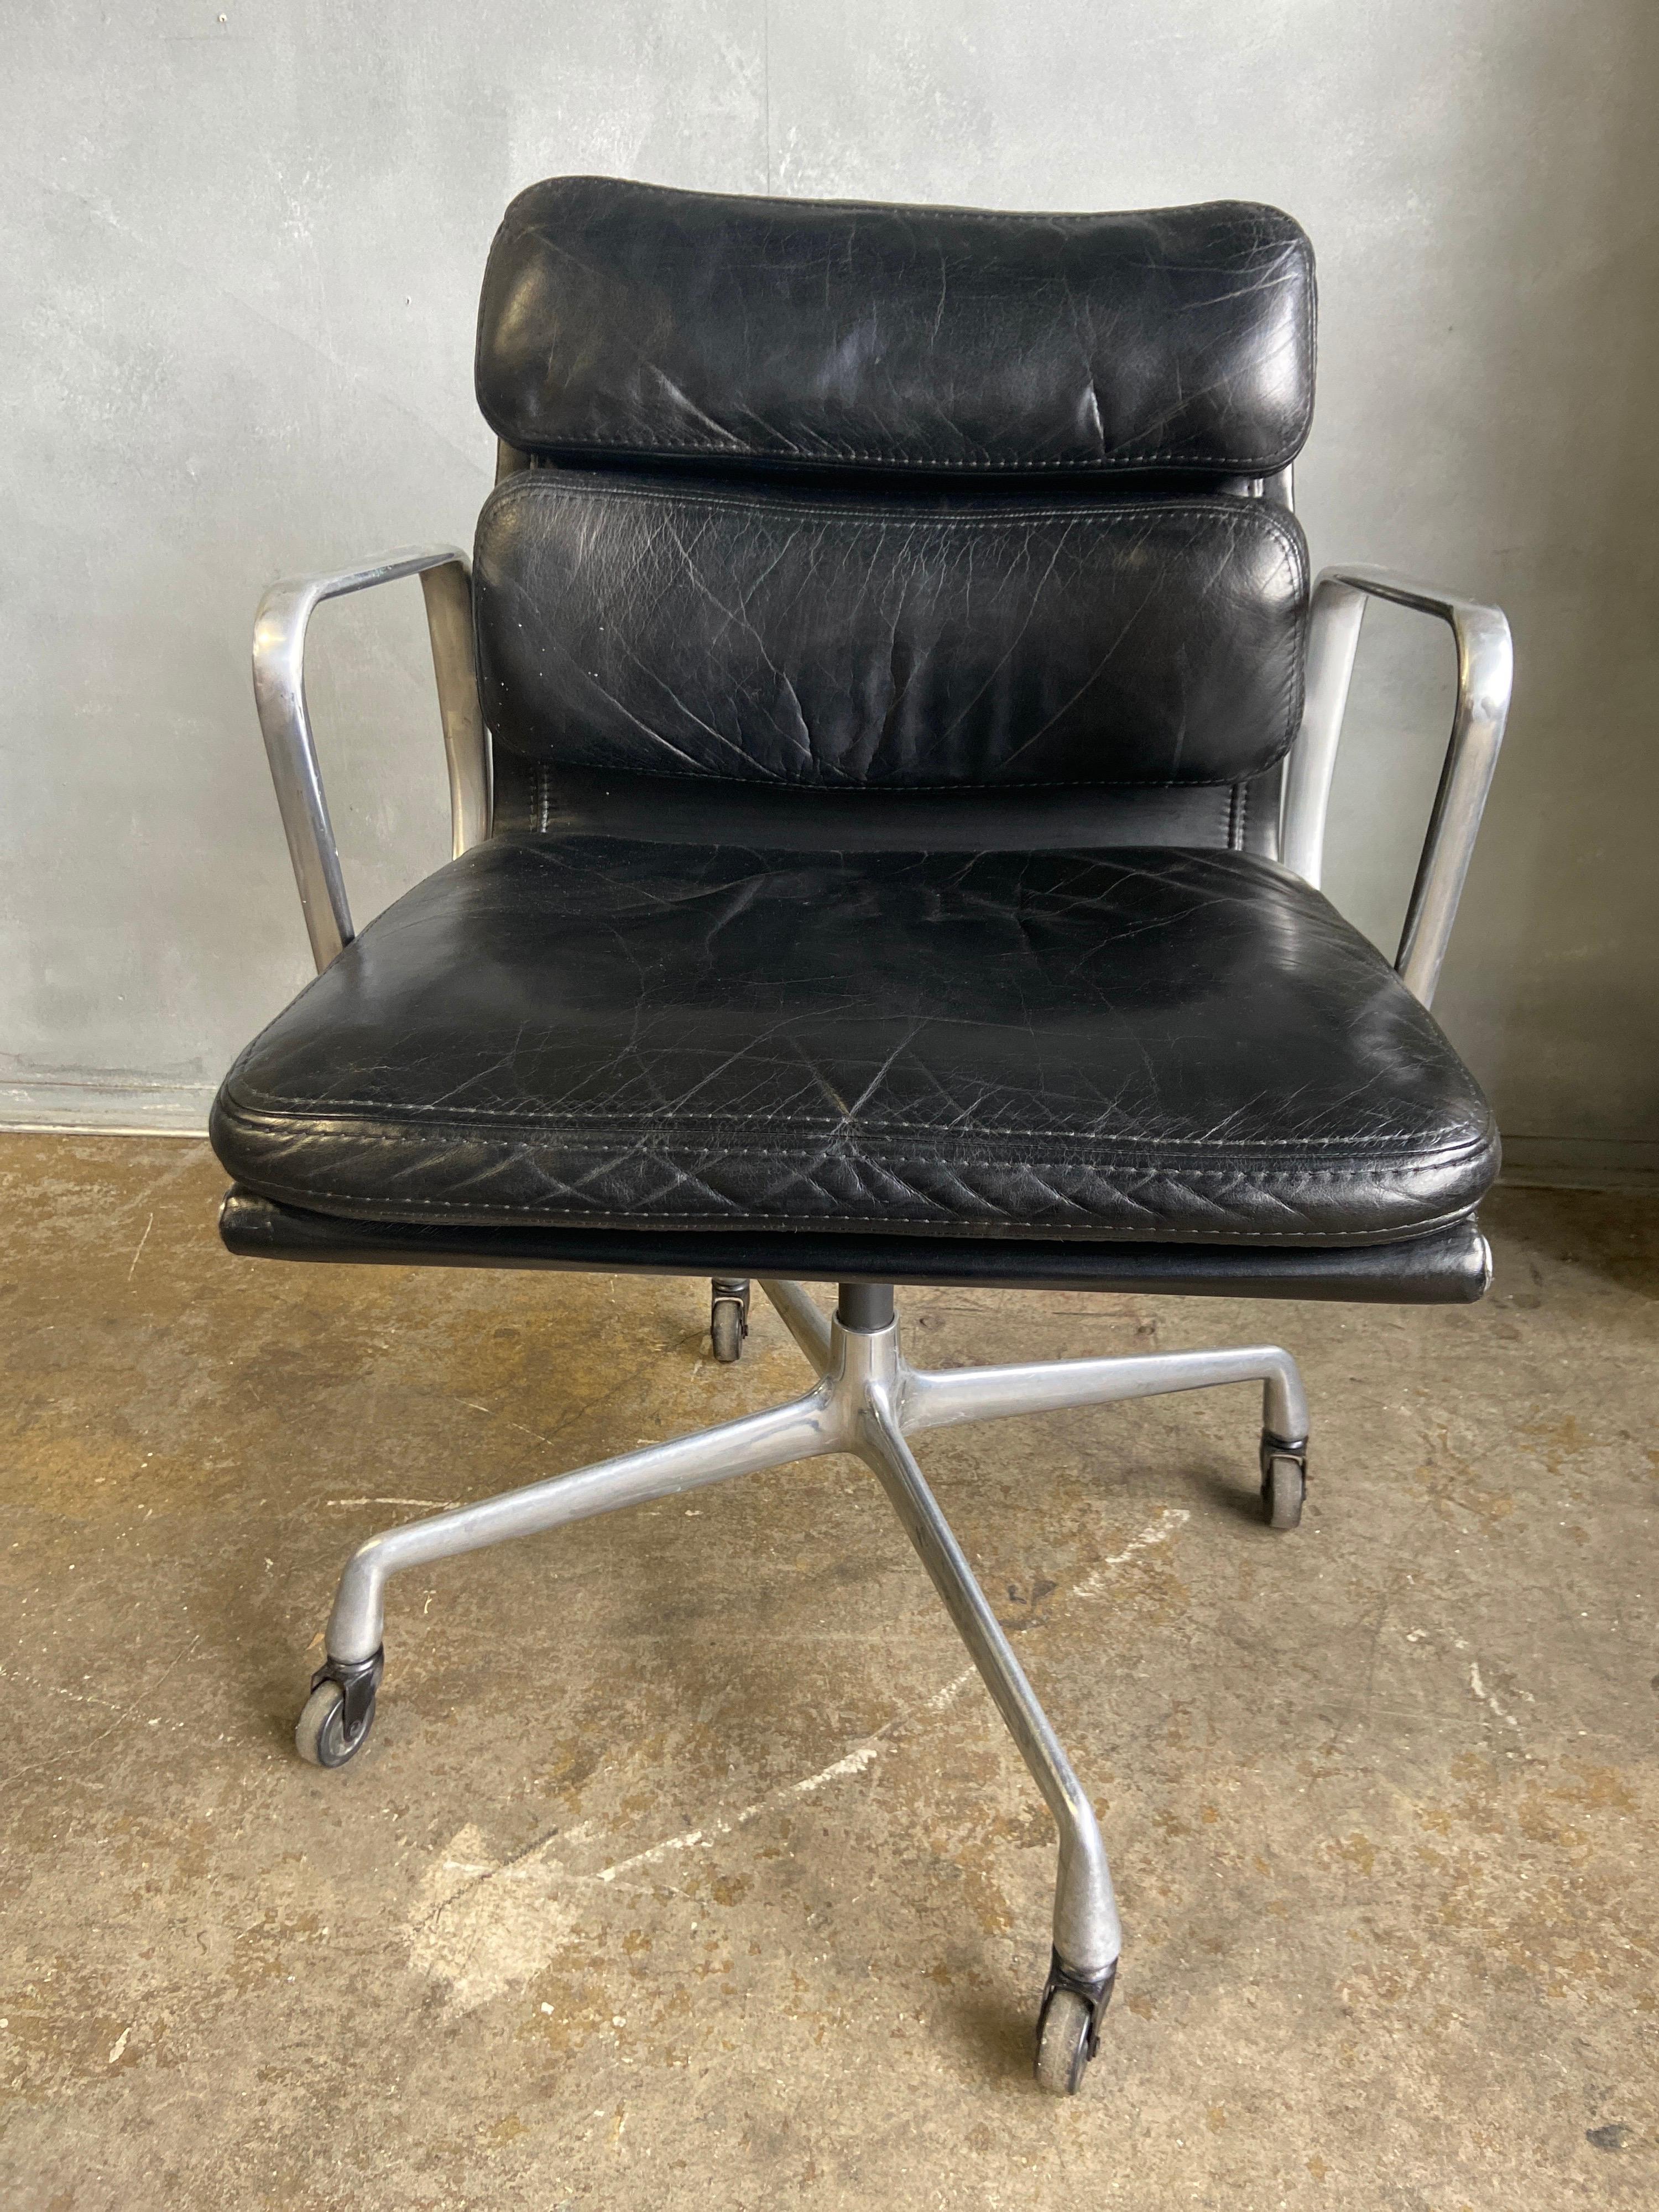 Eames for Herman Miller vintage soft pad chair in black leather with low back

These authentic vintage examples are icons of Mid-Century Modern design. The chairs part of the Eames aluminium group designed for Herman Miller revolutionized office